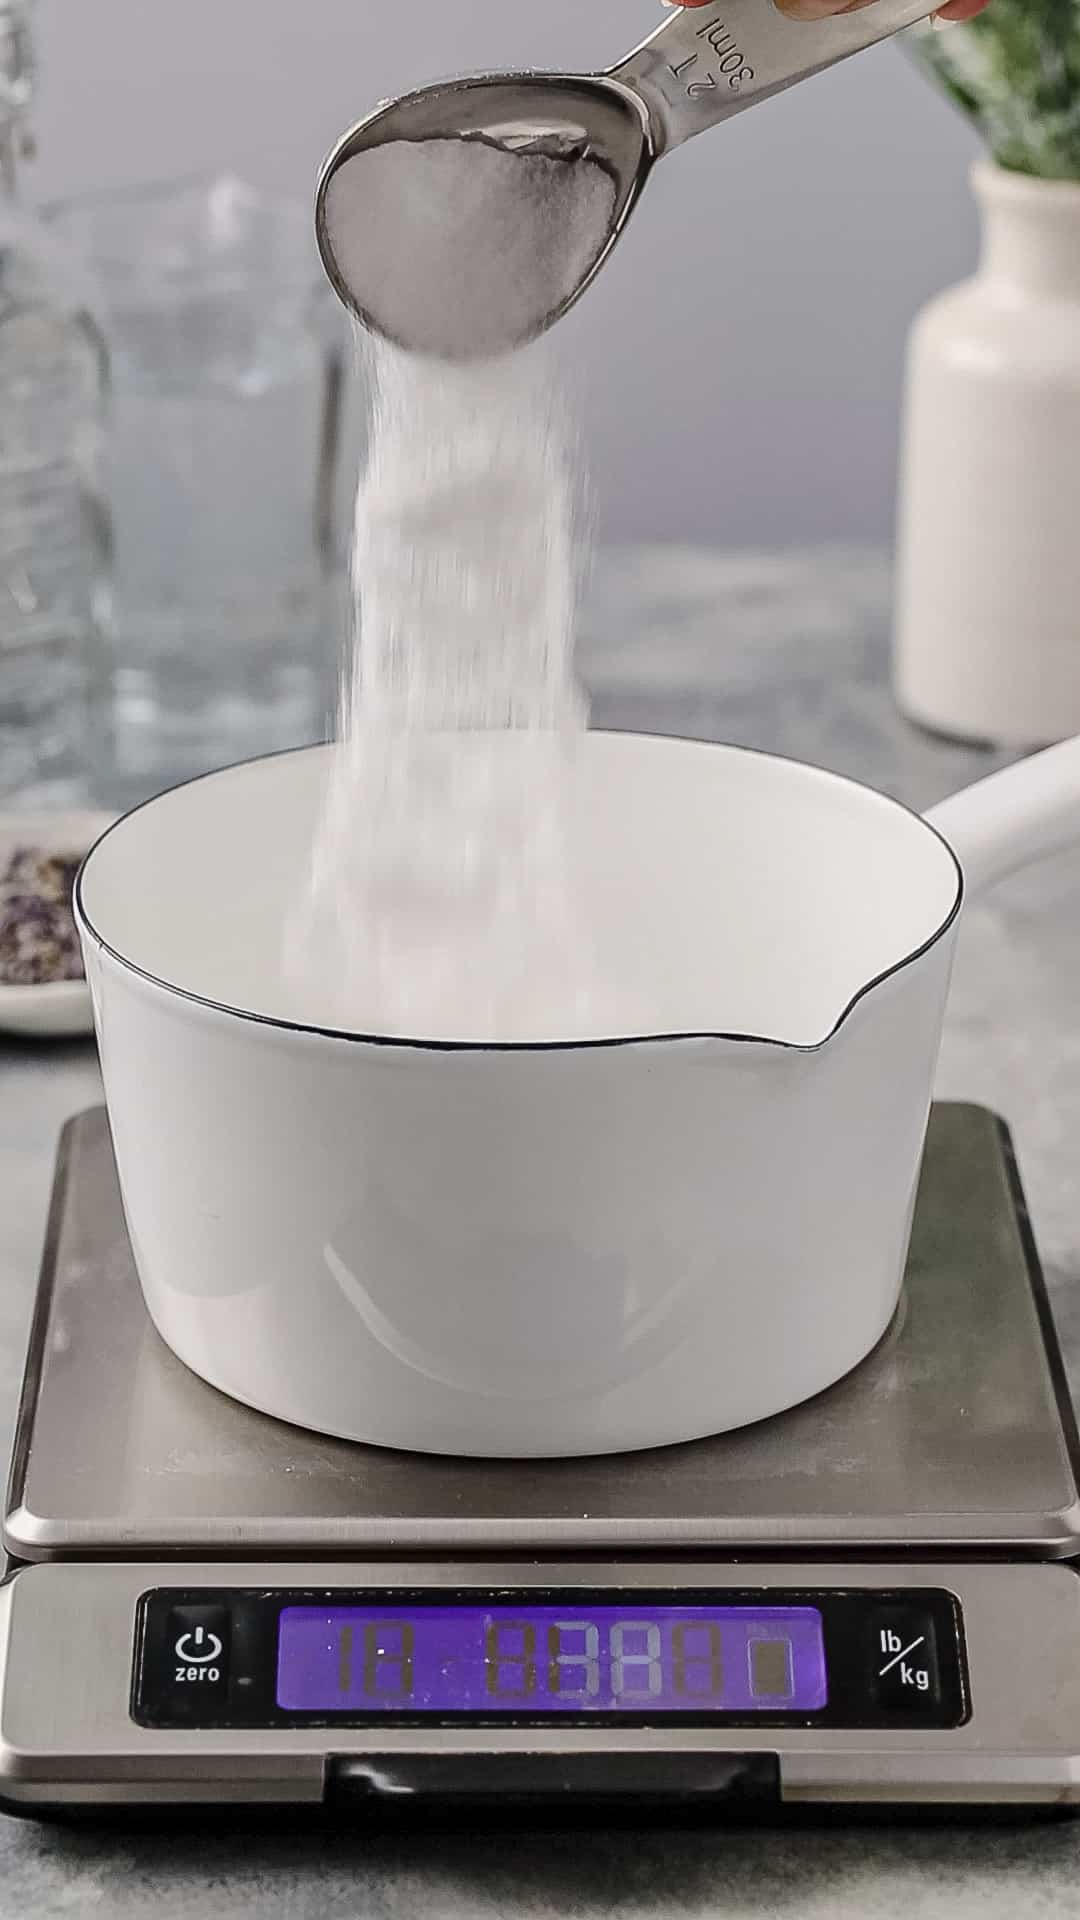 Hand pouring sugar from a measuring spoon into a white pot.